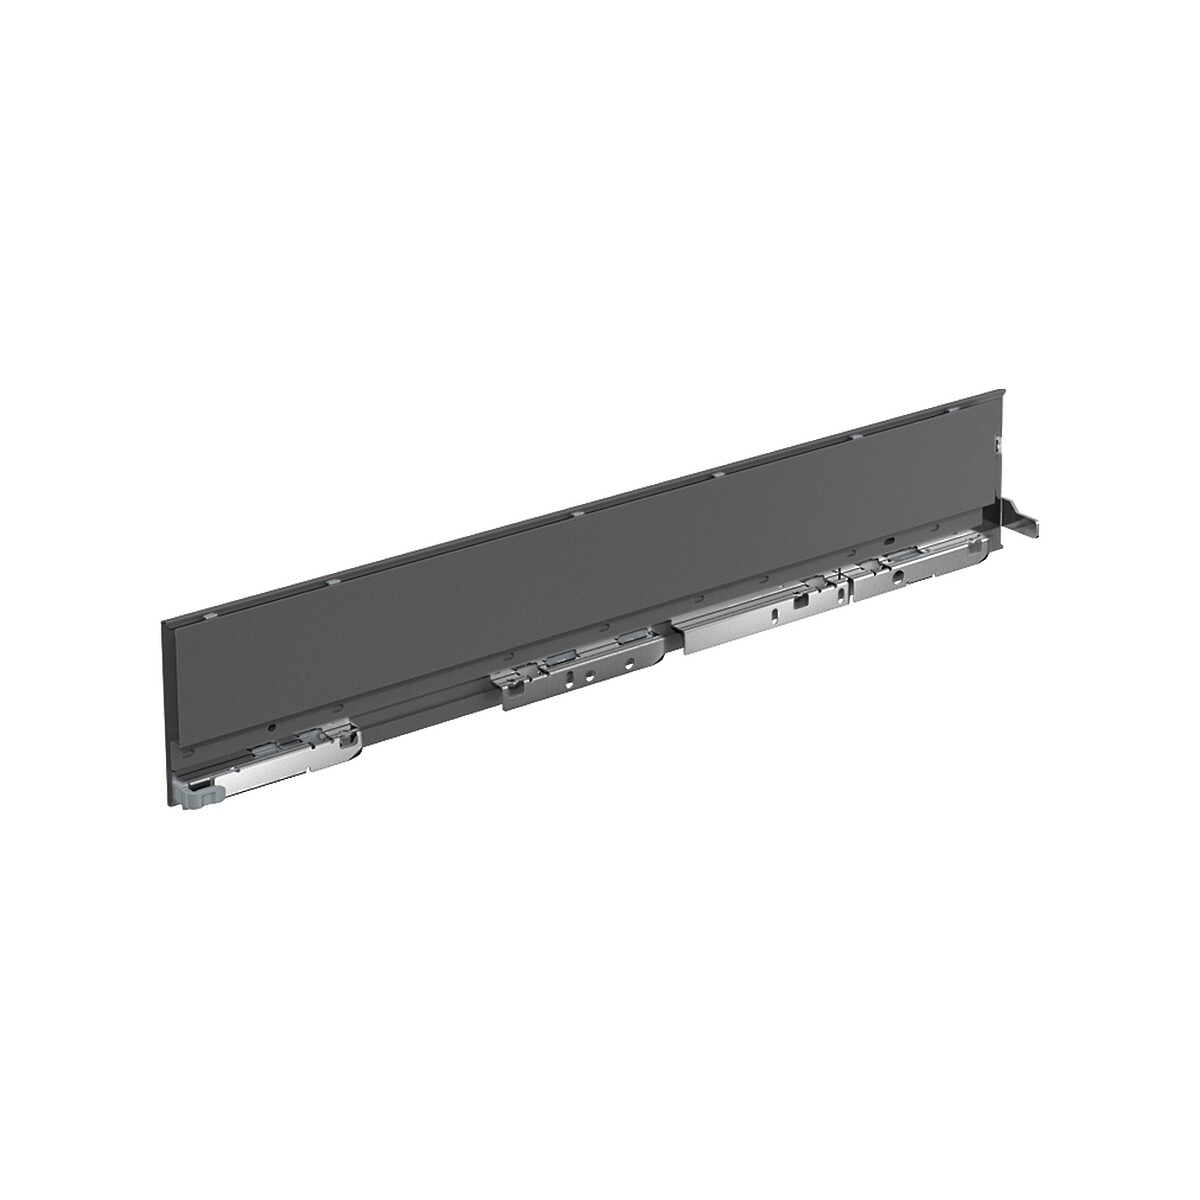 AvanTech YOU Drawer side profile, height 101 mm x NL 270 mm, Anthracite, Left